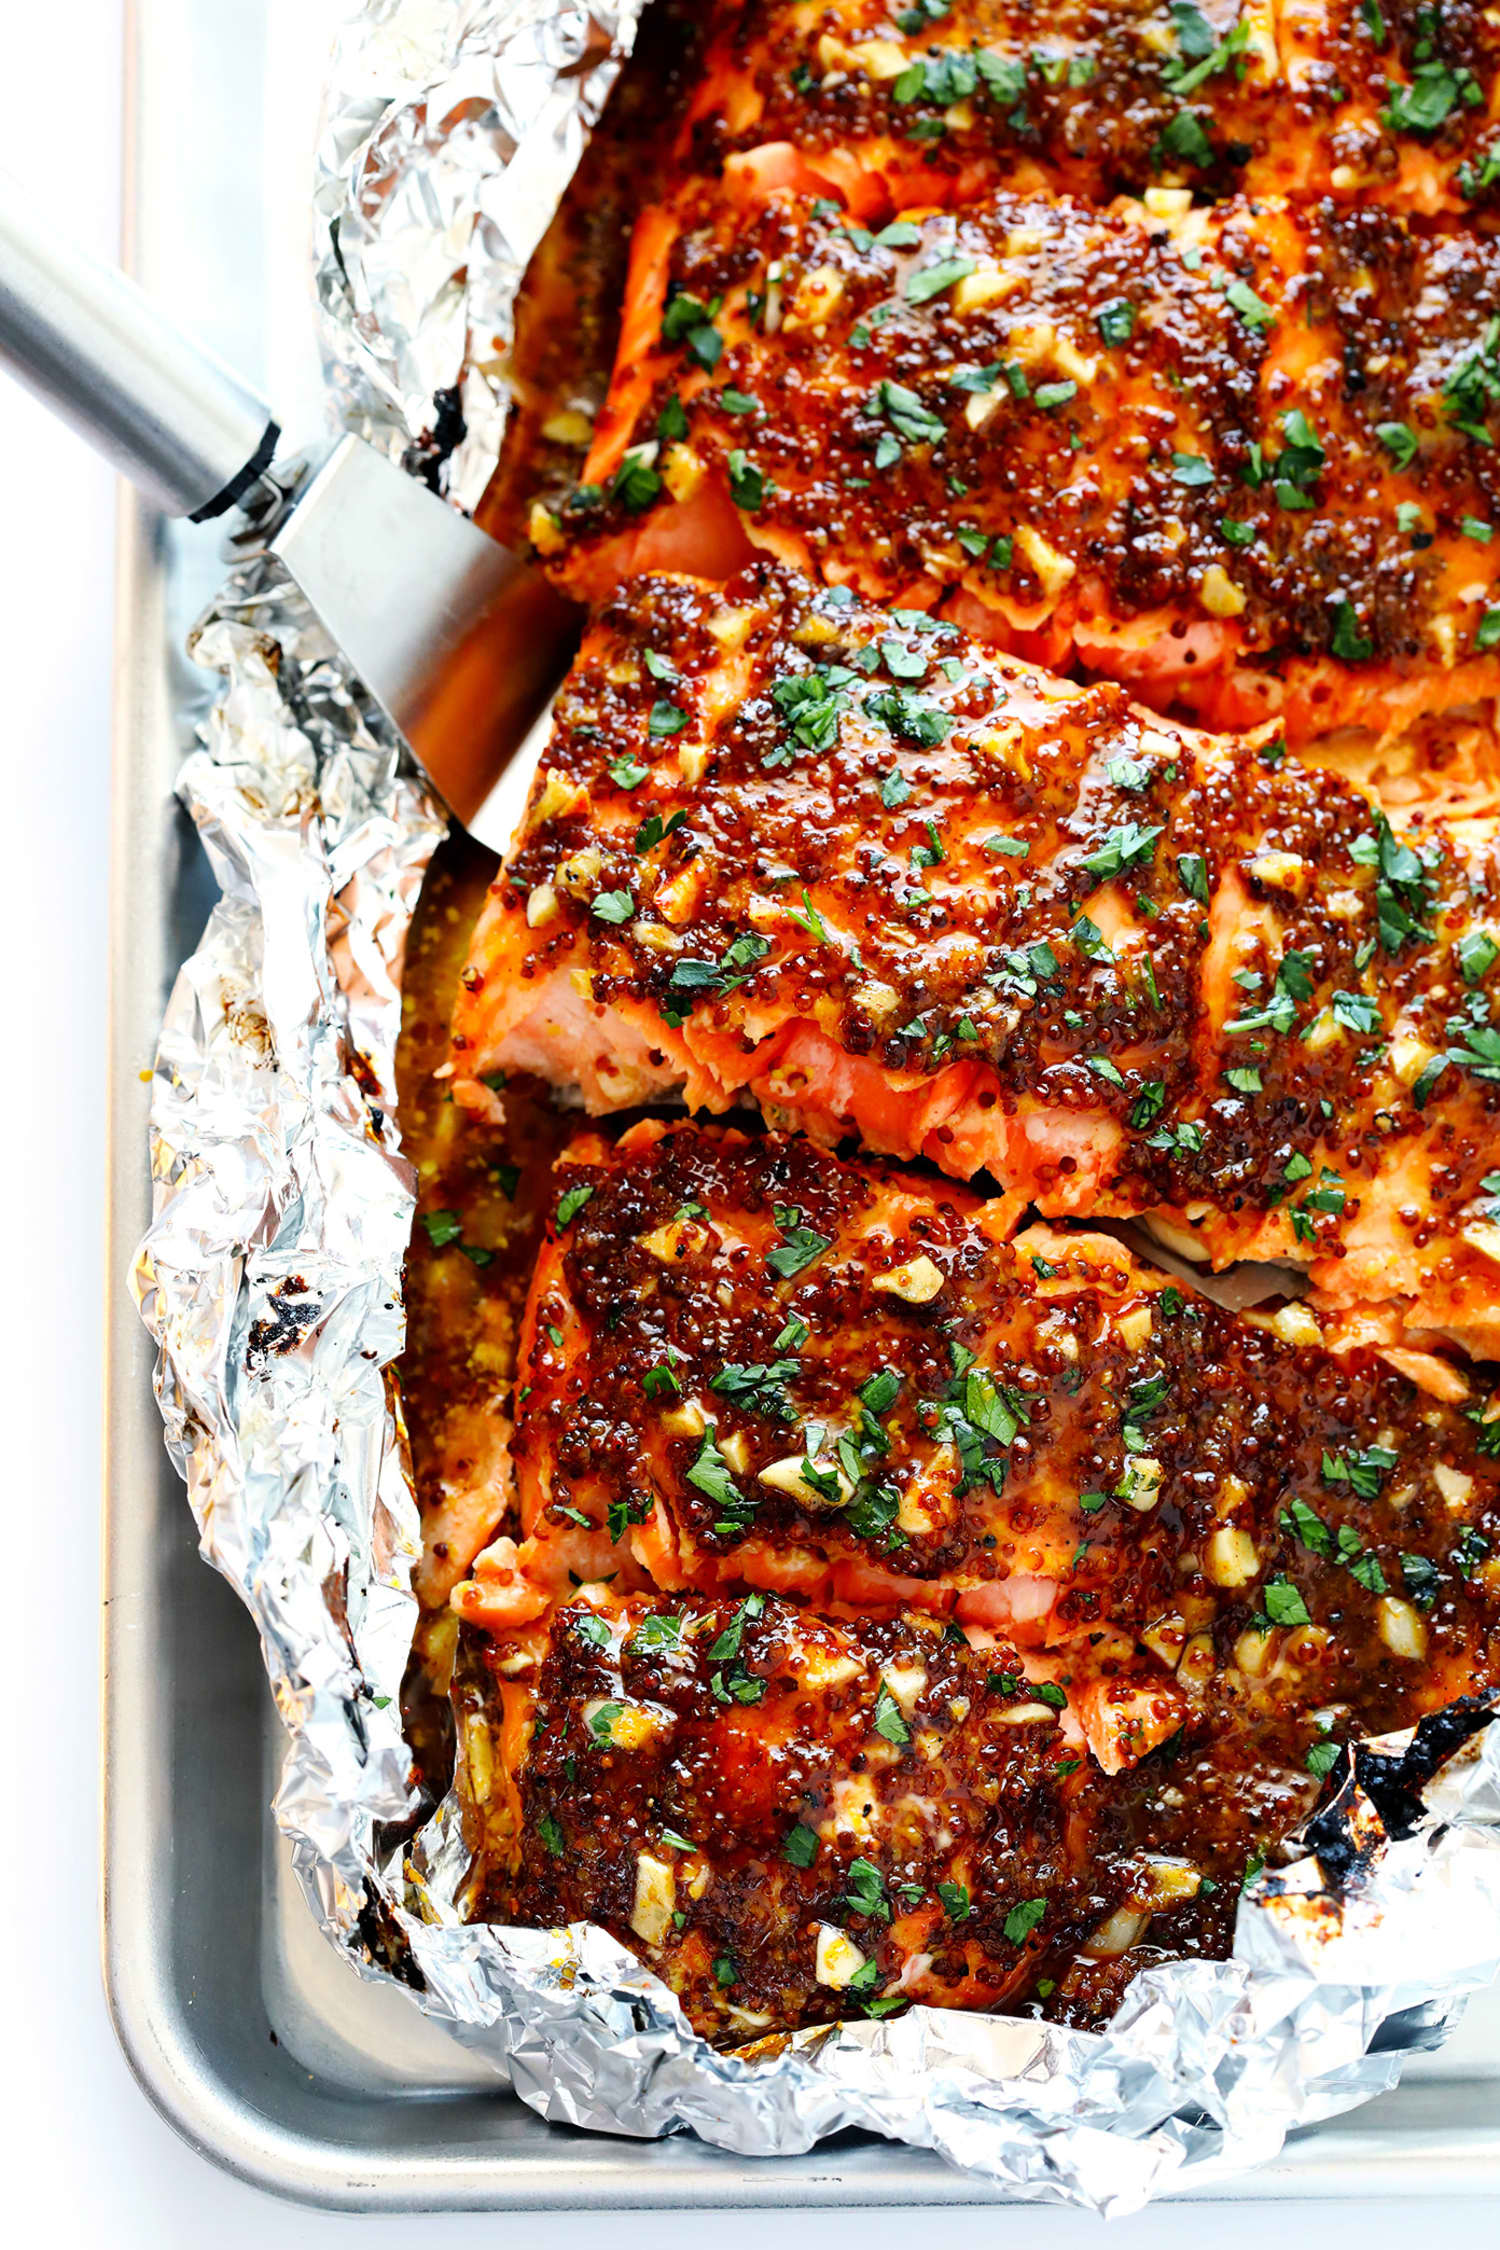 Cook Your Salmon in Foil for Tender, Flaky Results | Kitchn